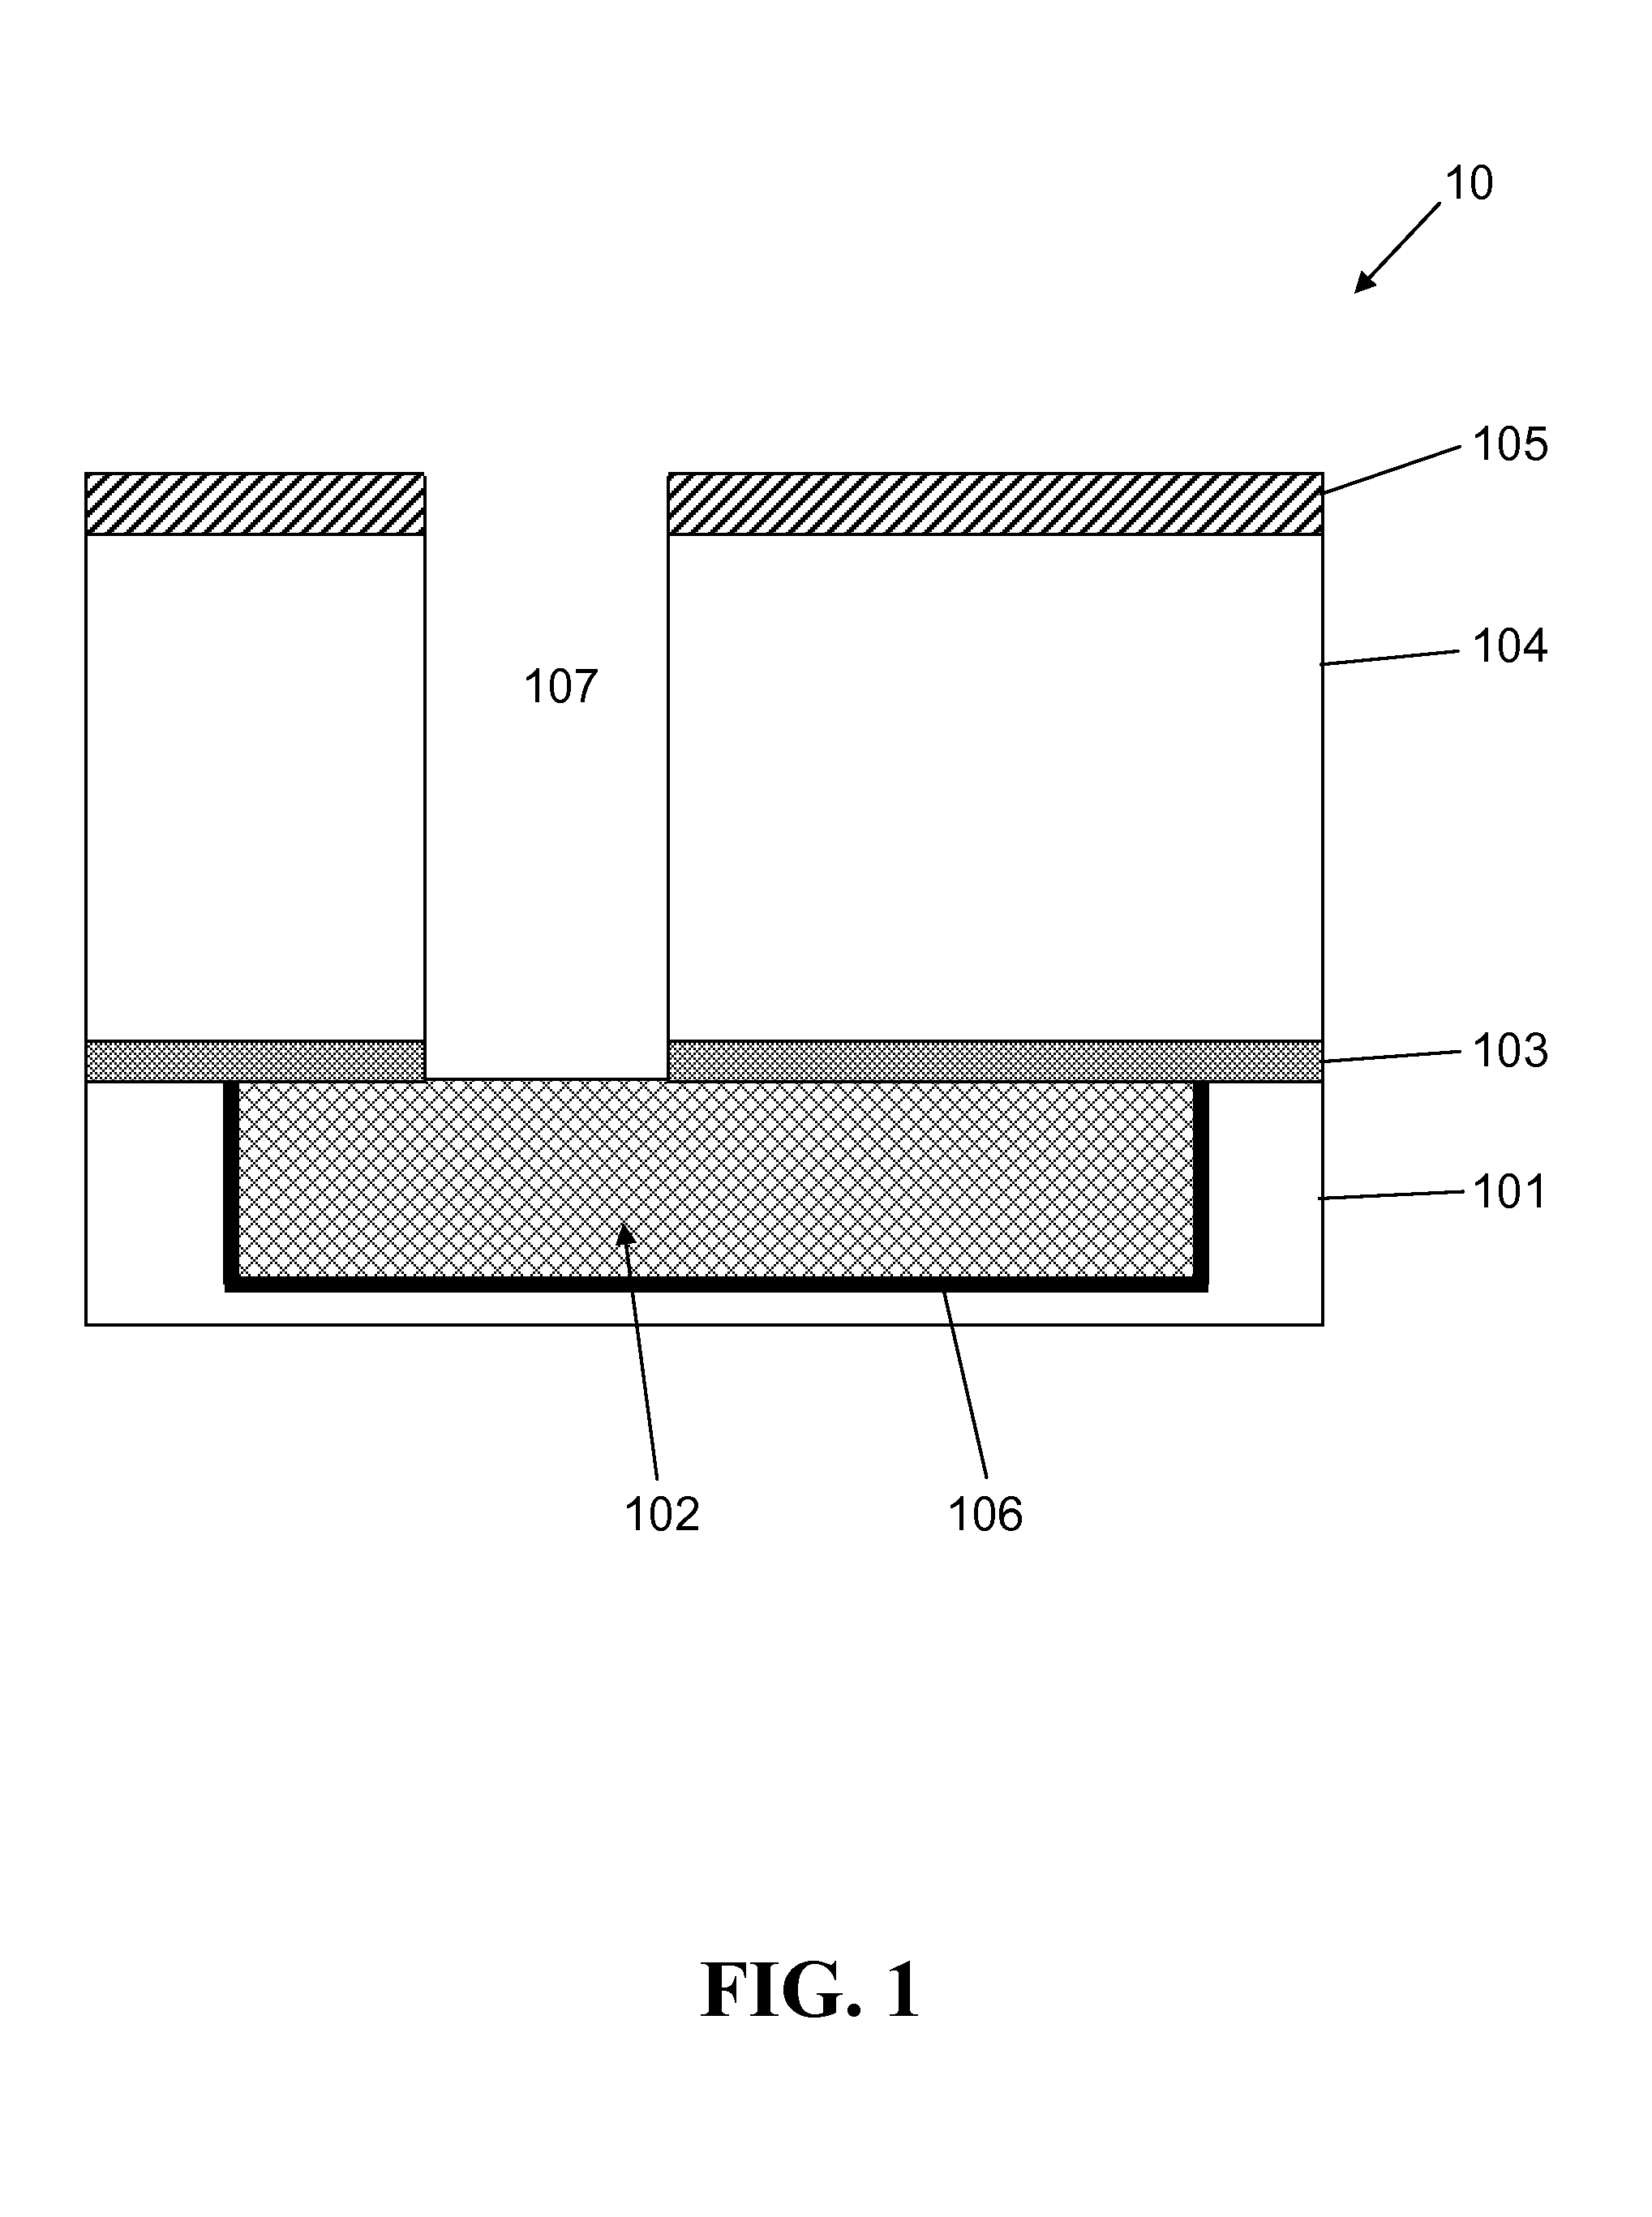 Semiconductor structure with liner